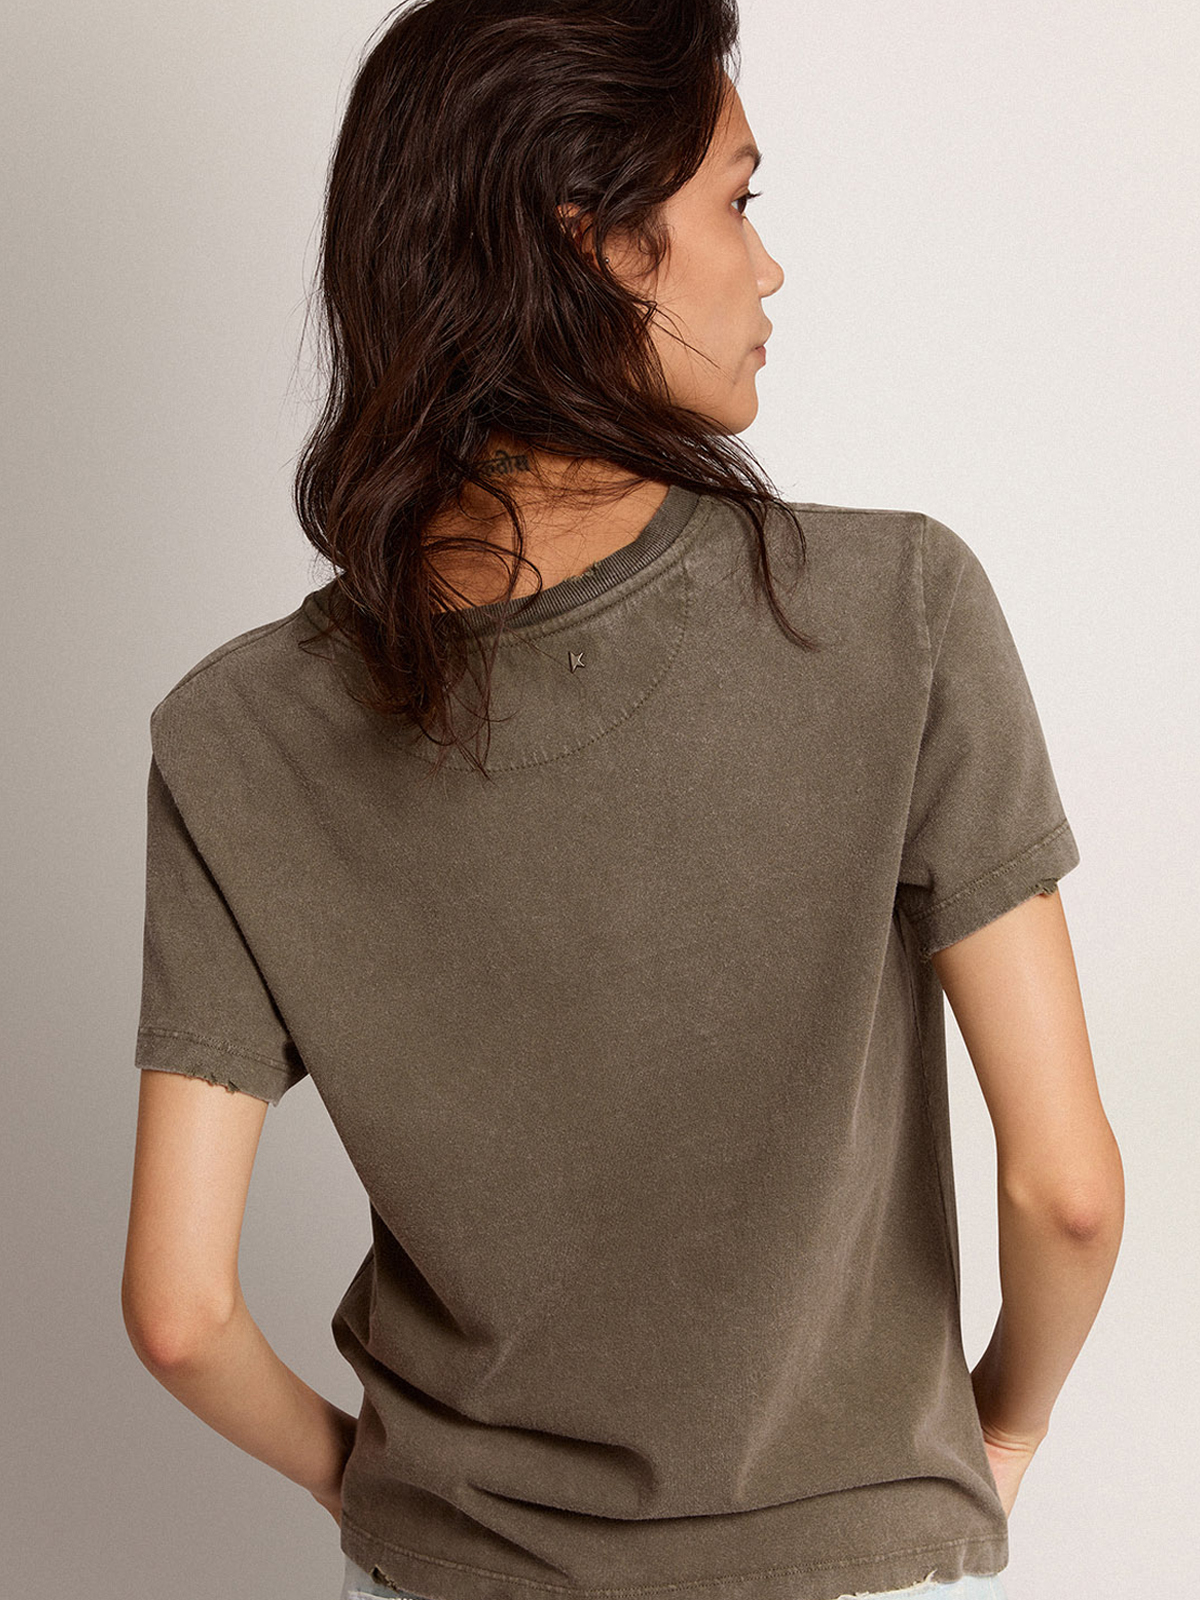 Women's distressed T-shirt in olive green Golden